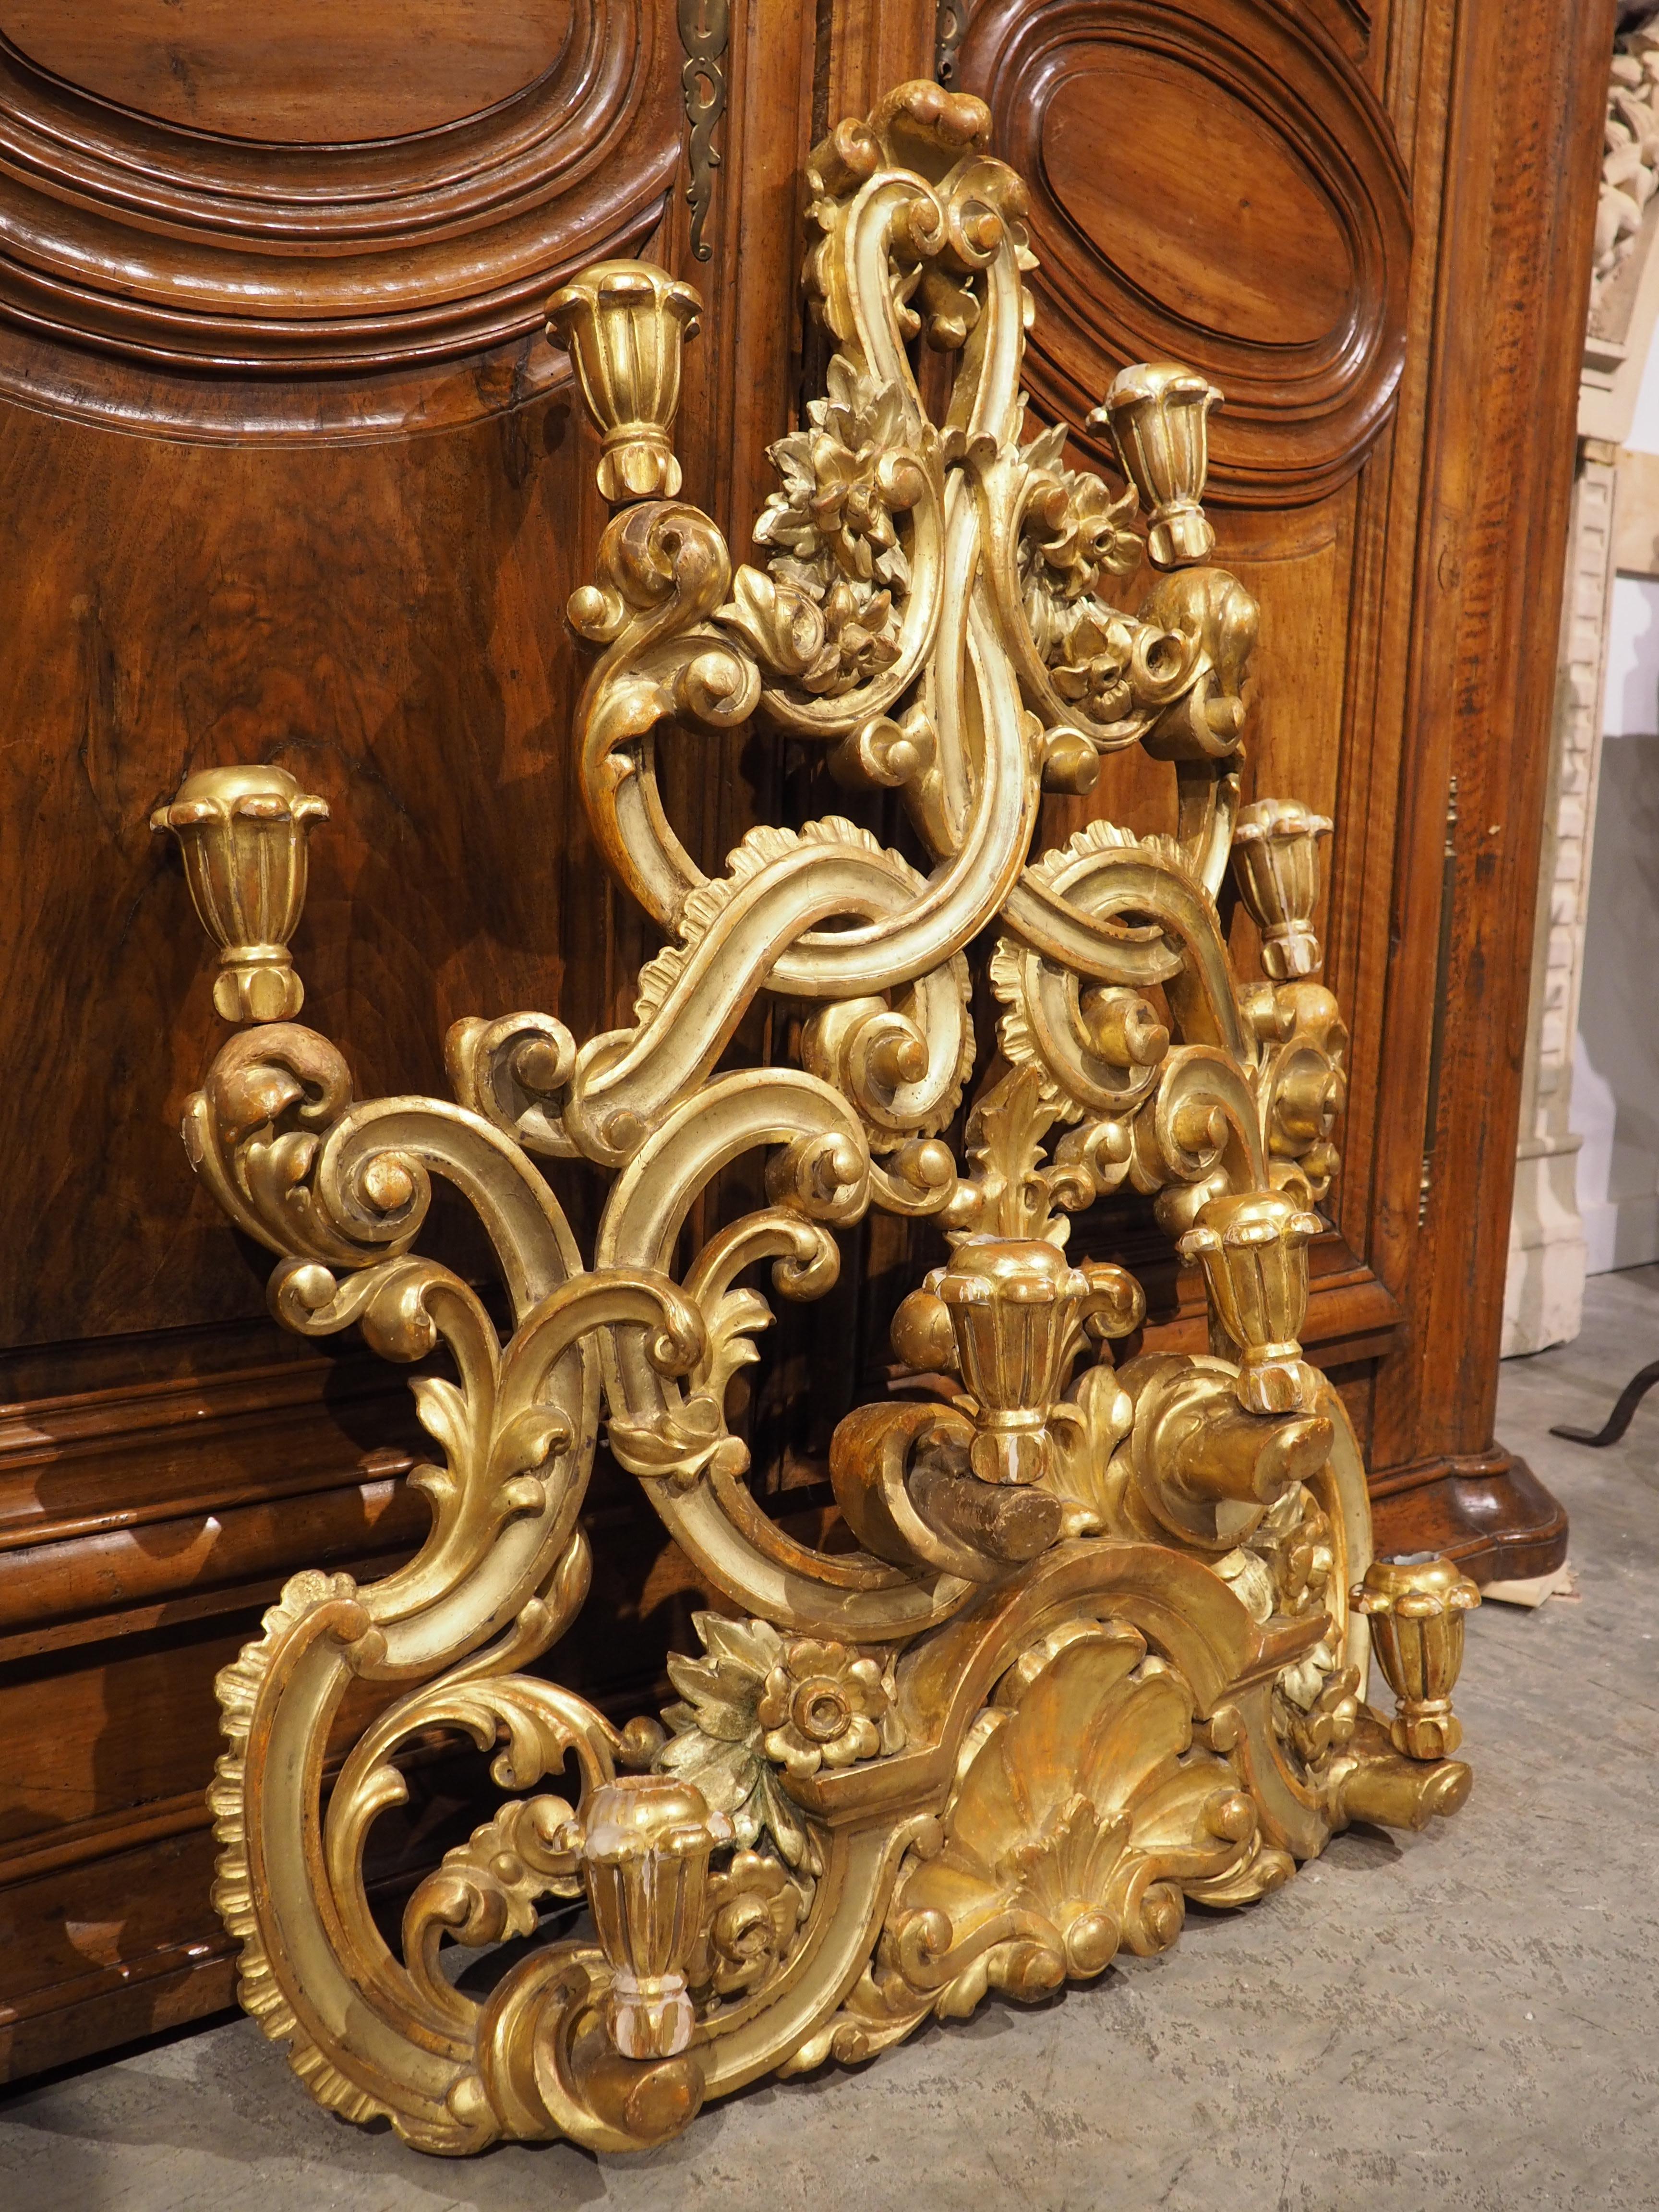 Large Antique Italian Giltwood 8-Light Wall Candelabra, Circa 1750 For Sale 8